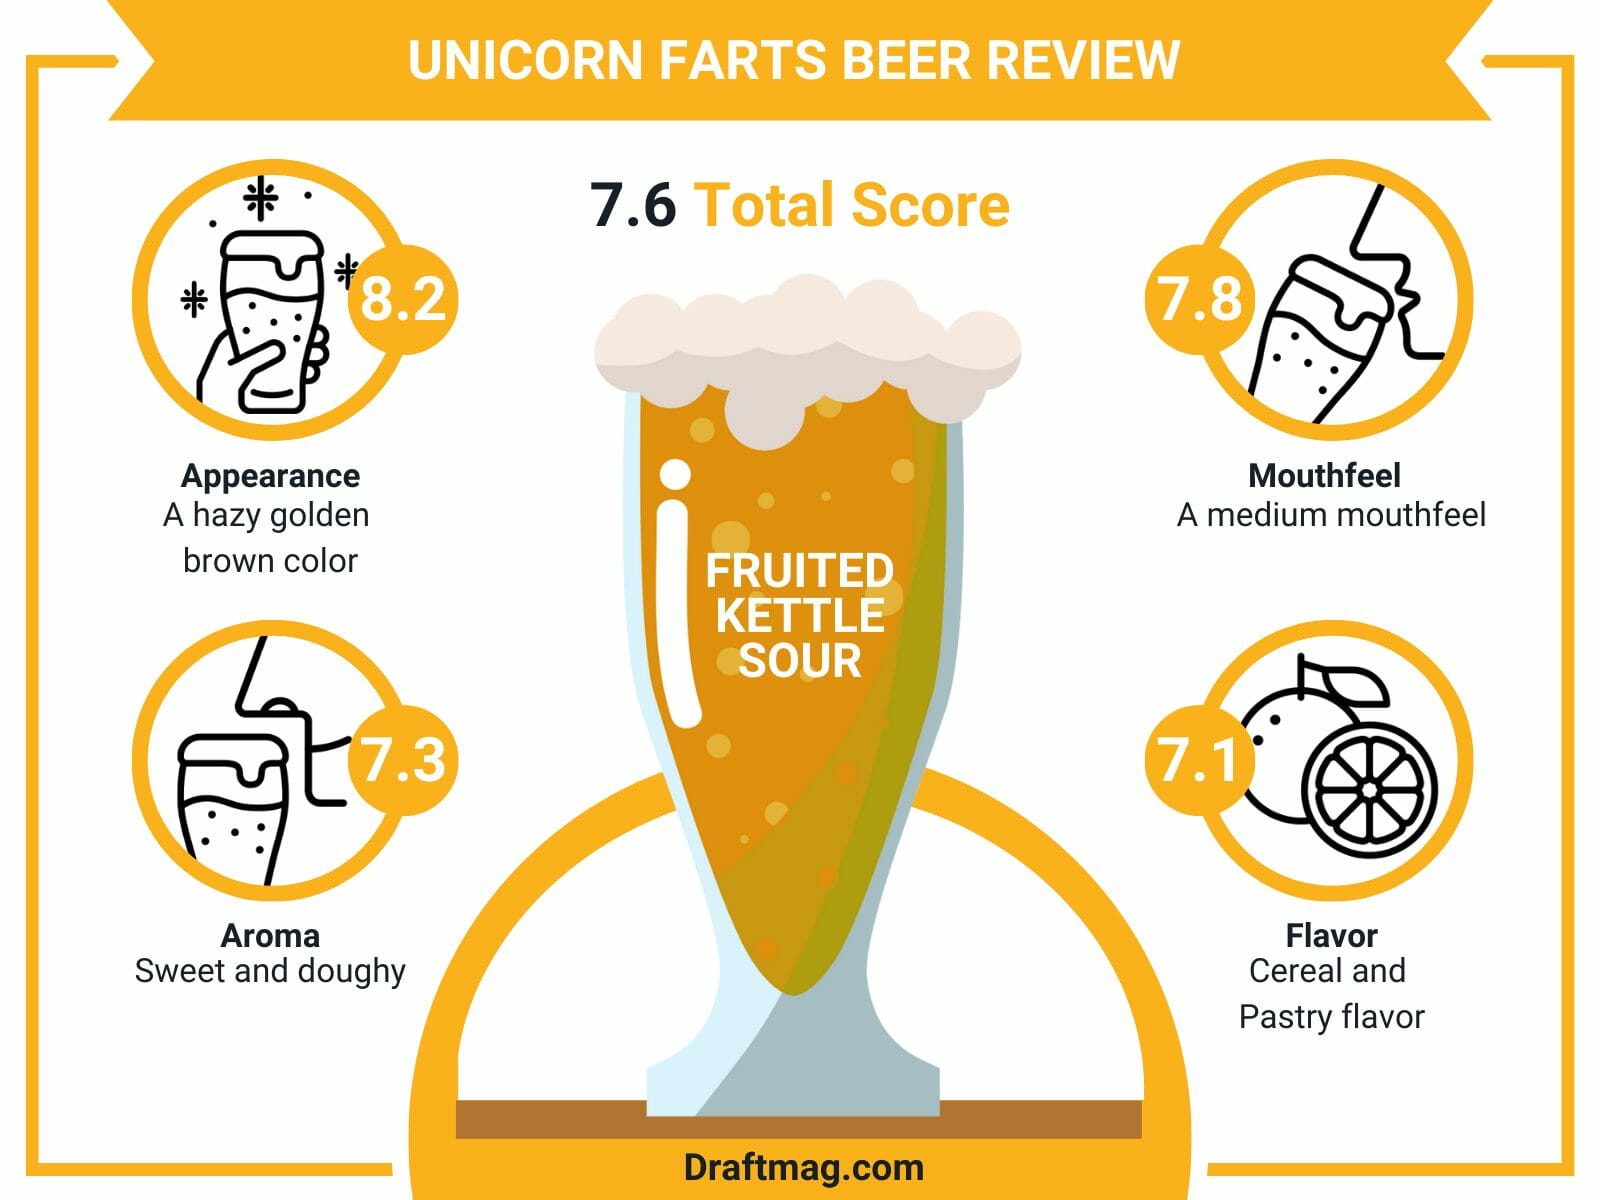 Unicorn farts review infographics